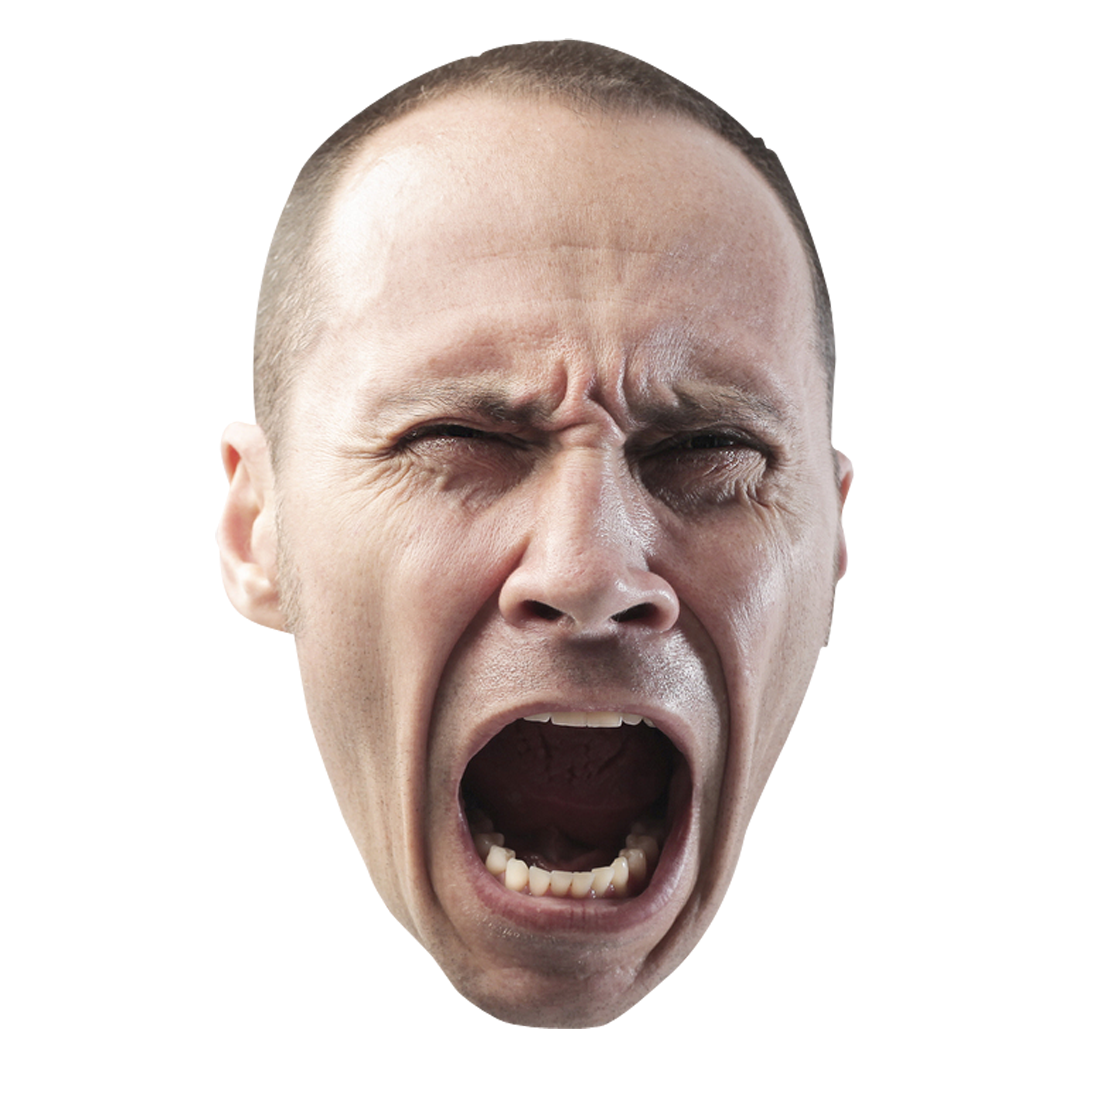 Angry Person PNG HD File pngteam.com